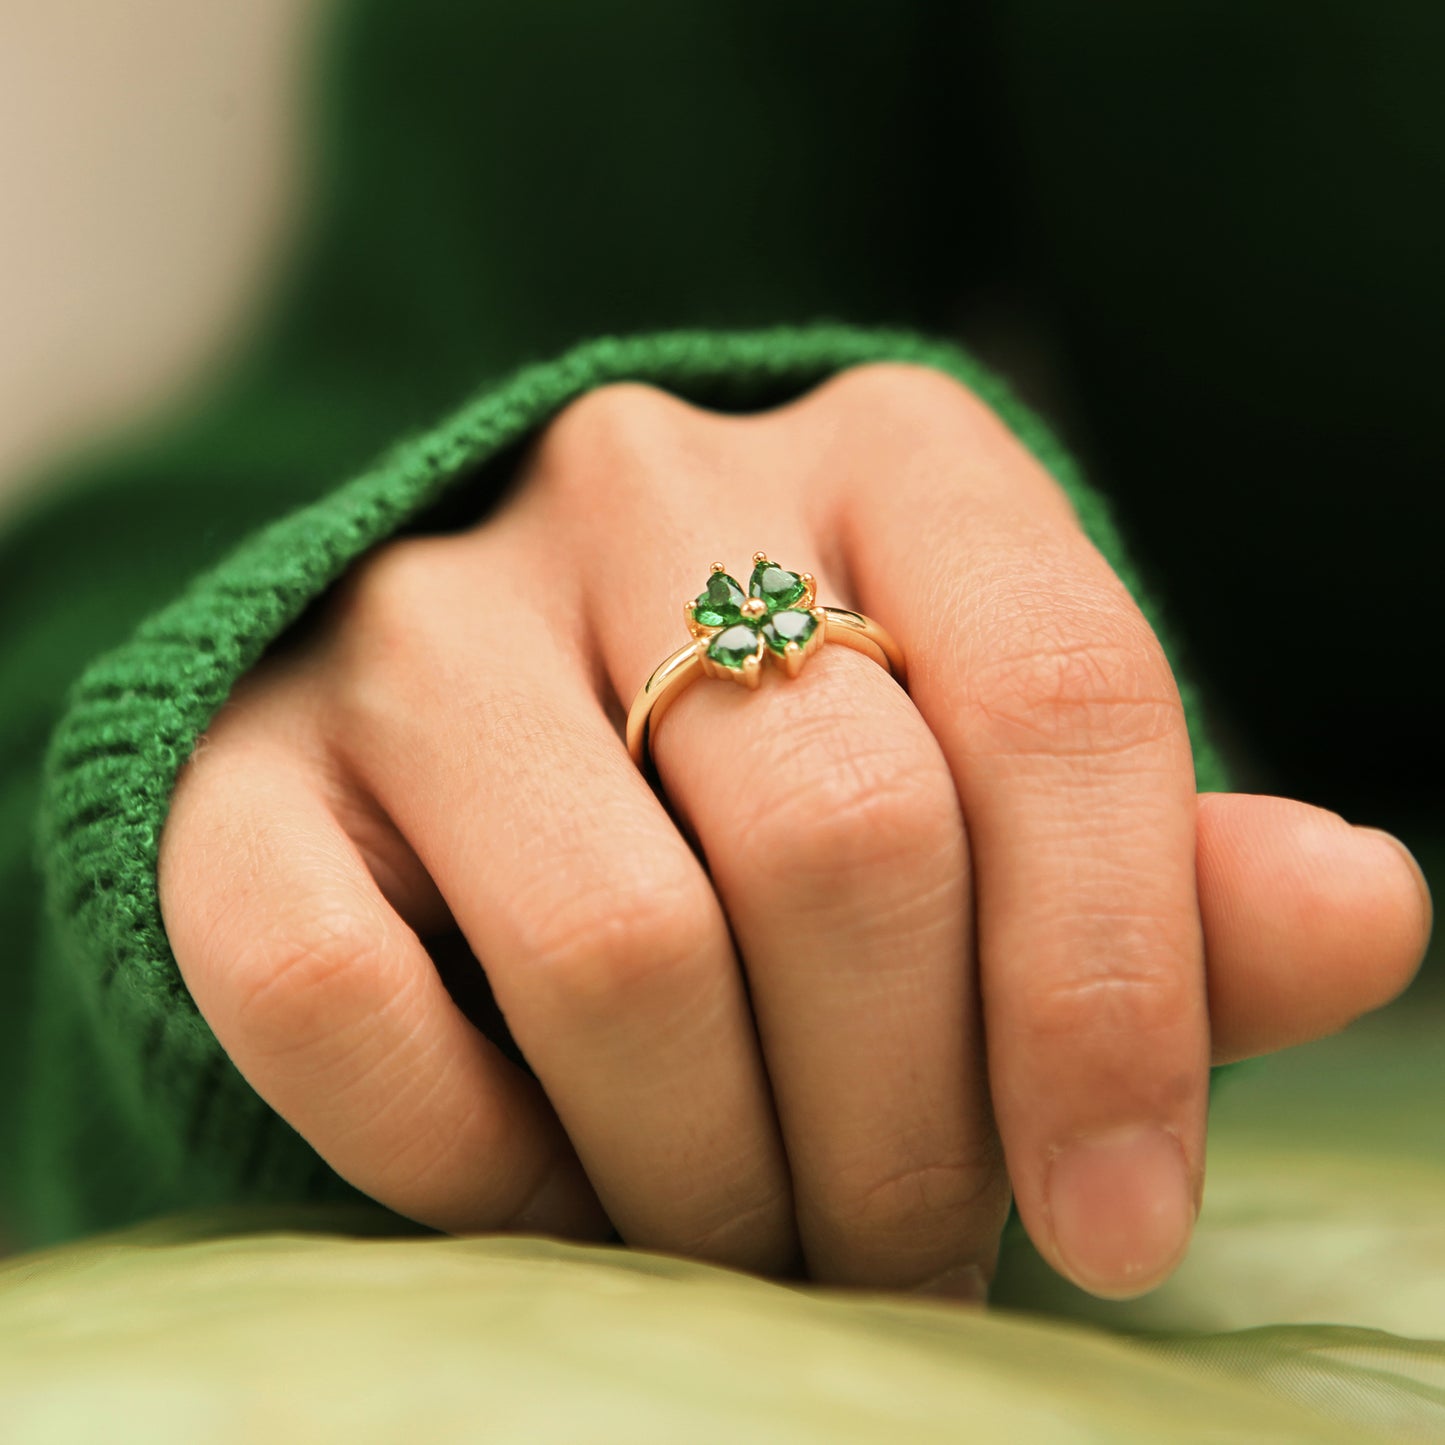 To My Best Friend "A best friend is like a four leaf clover. Hard to find lucky to have"  Ring